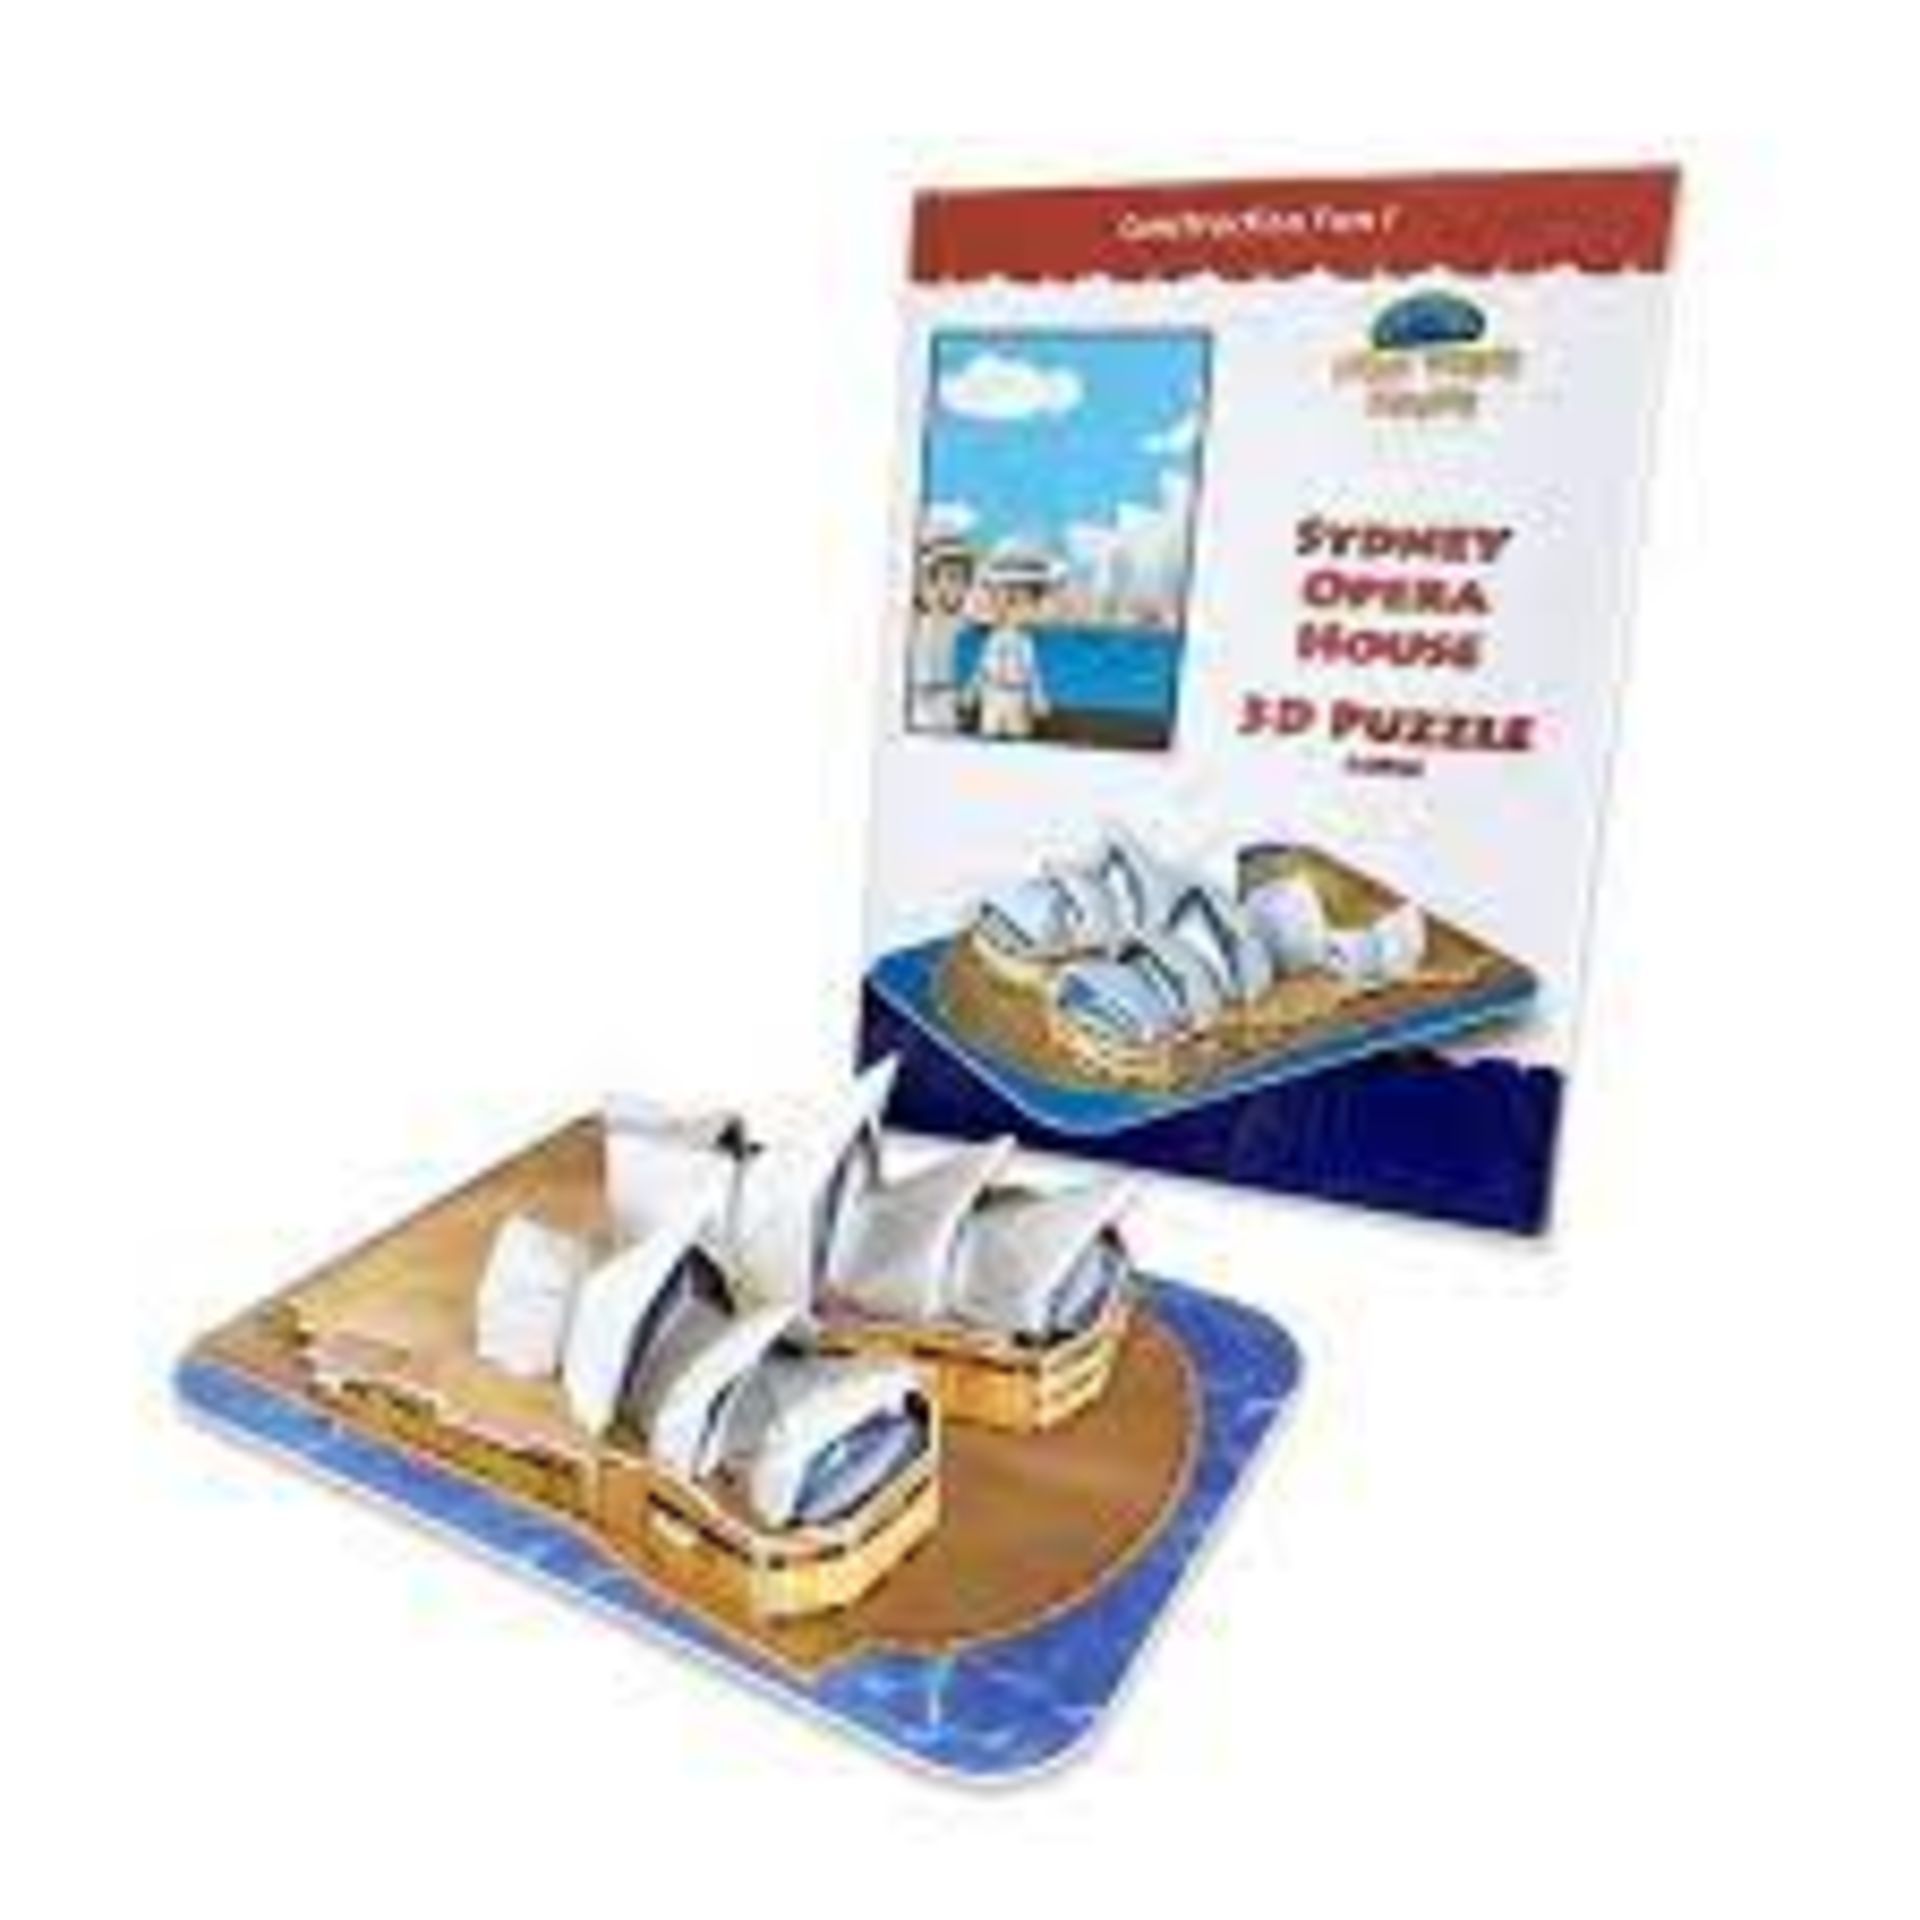 30 X BRAND NEW EDUCTAIONAL SYDNEY OPERA HOUSE 3D PUZZLES